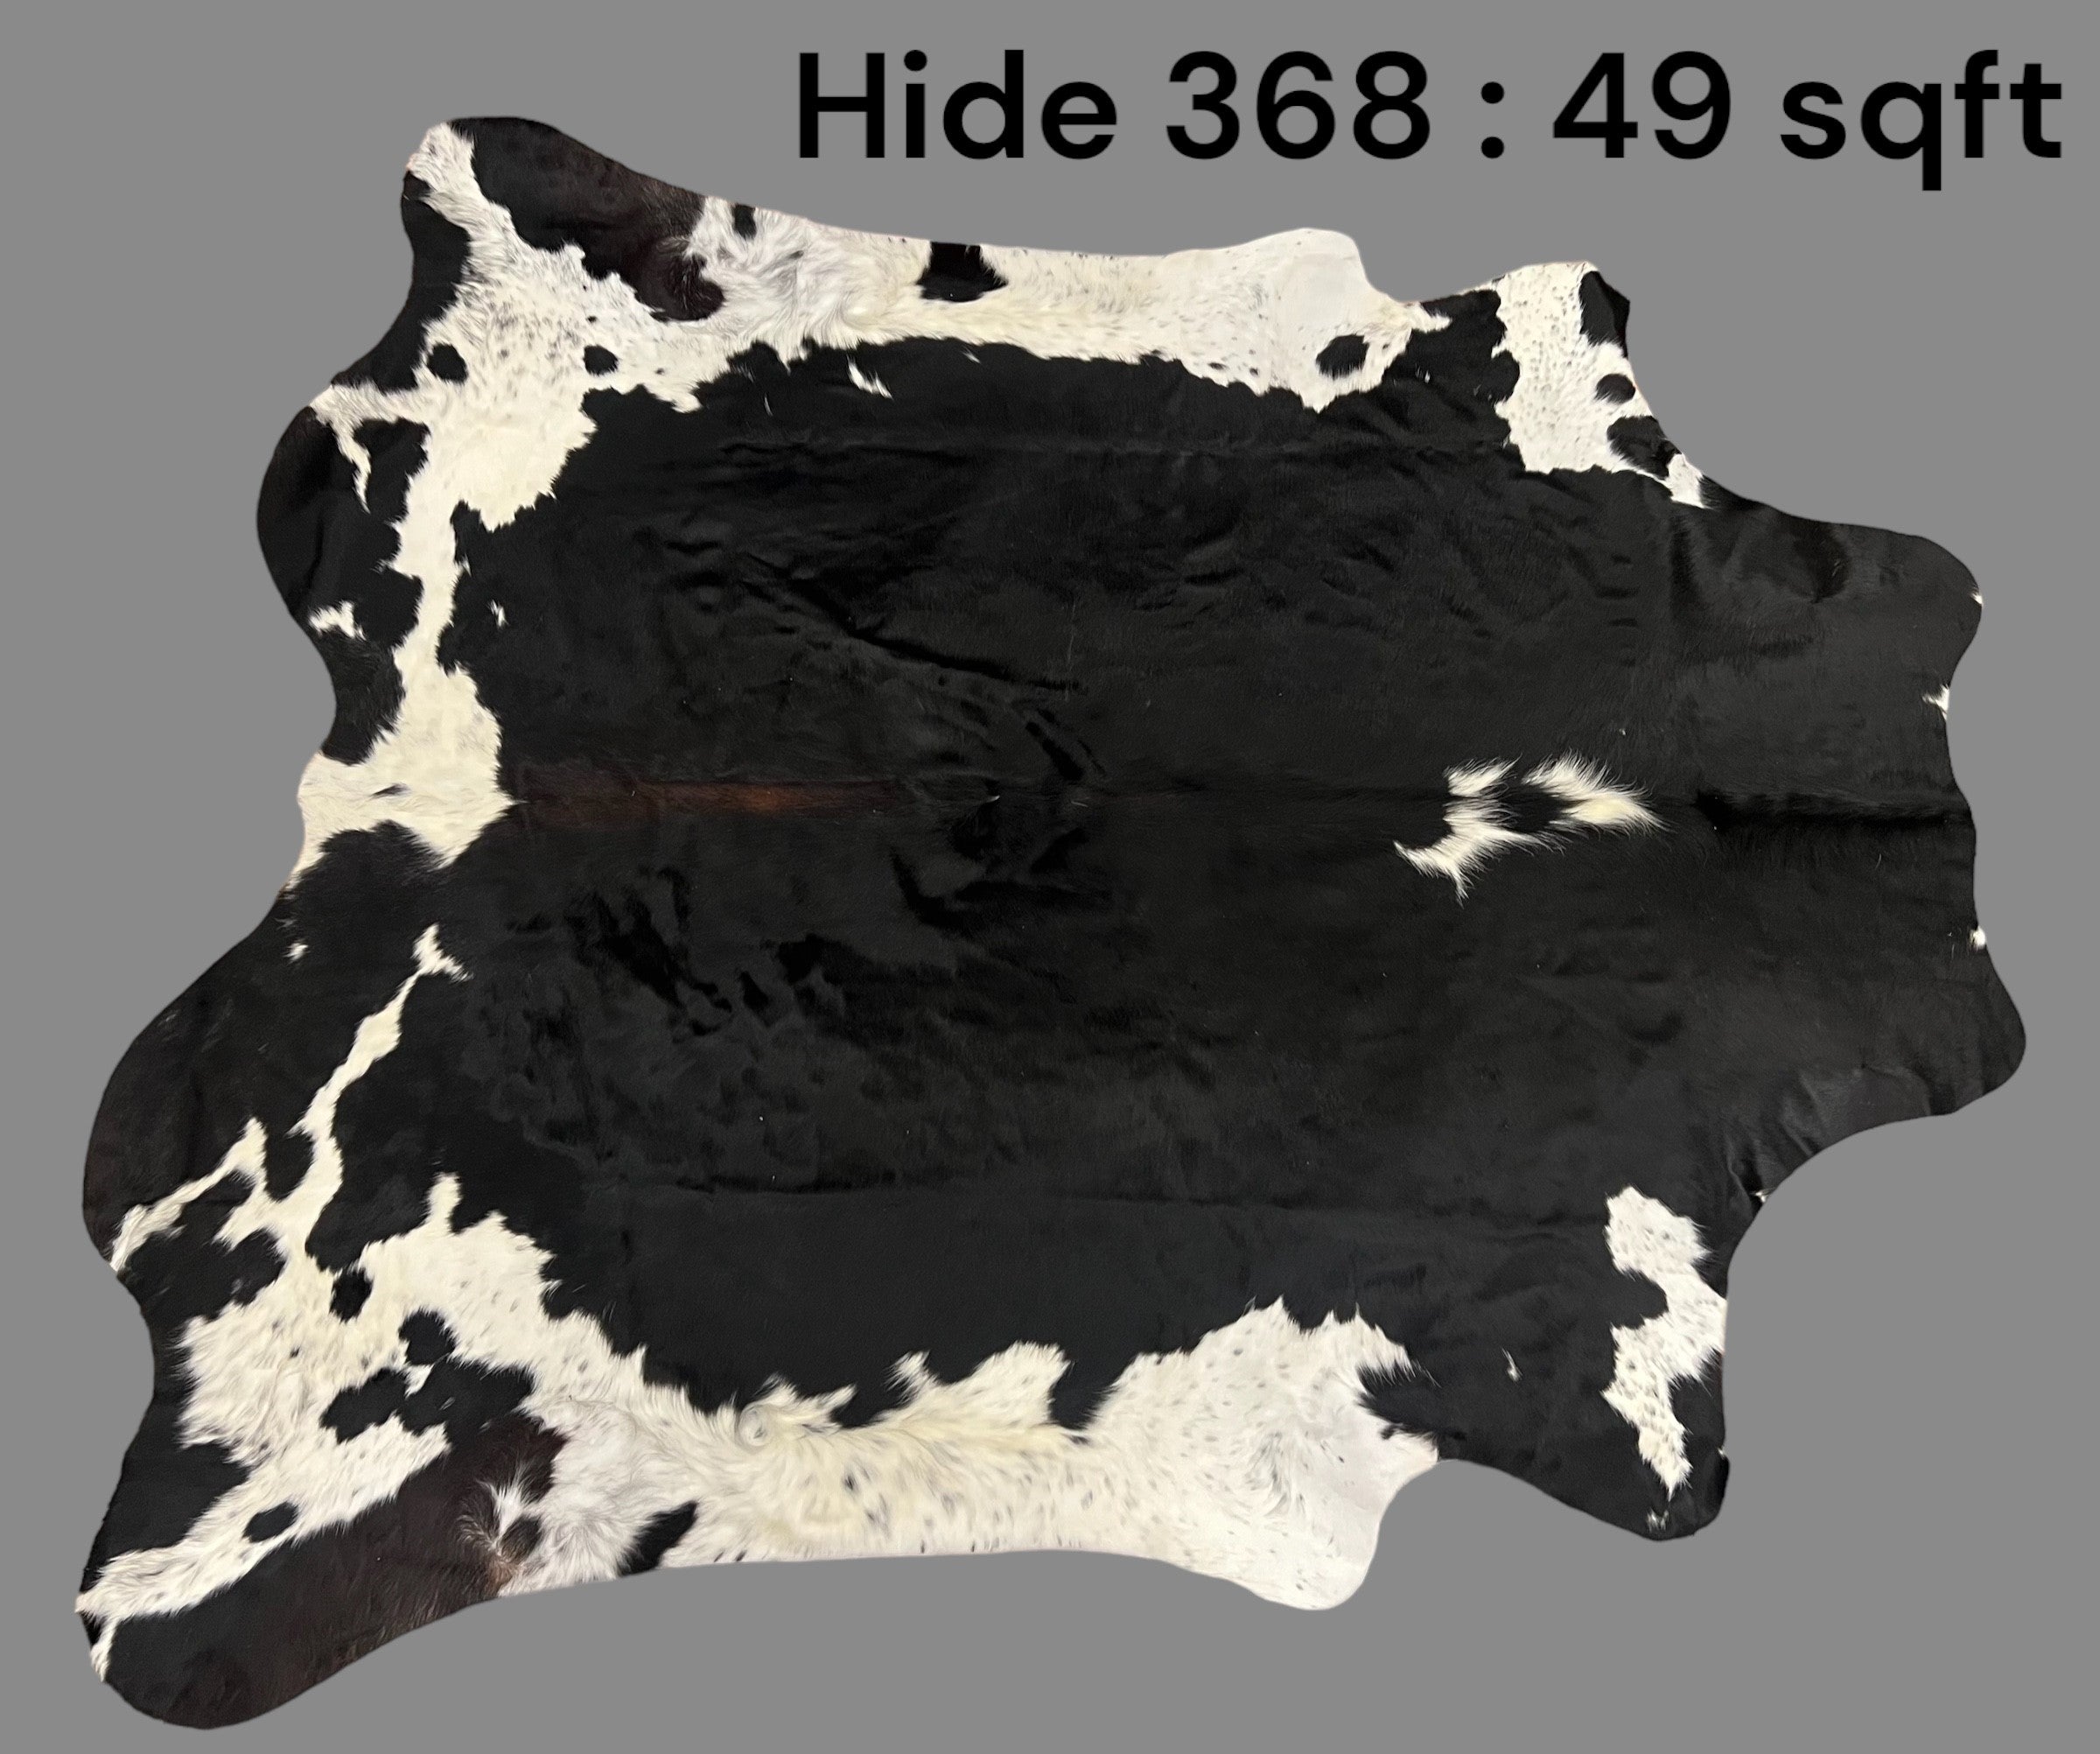 Natural Hair On Cow Hide : This Hide Is Perfect For Wall Hanging, Leather Rugs, Leather Upholstery & Leather Accessories. (Hide368)